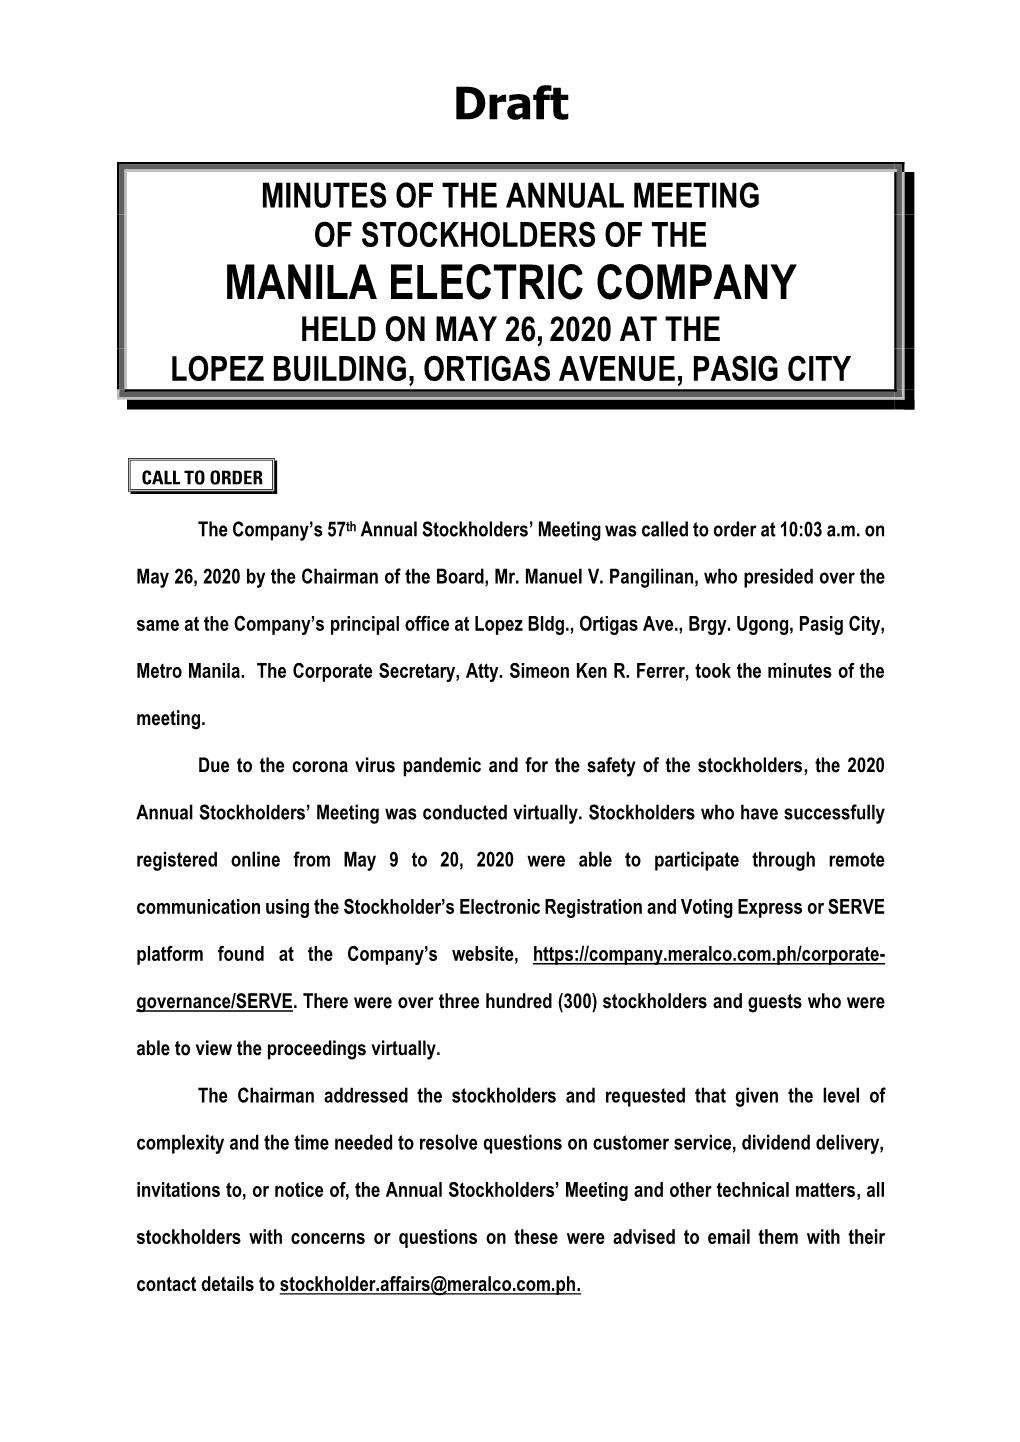 Manila Electric Company Held on May 26, 2020 at the Lopez Building, Ortigas Avenue, Pasig City